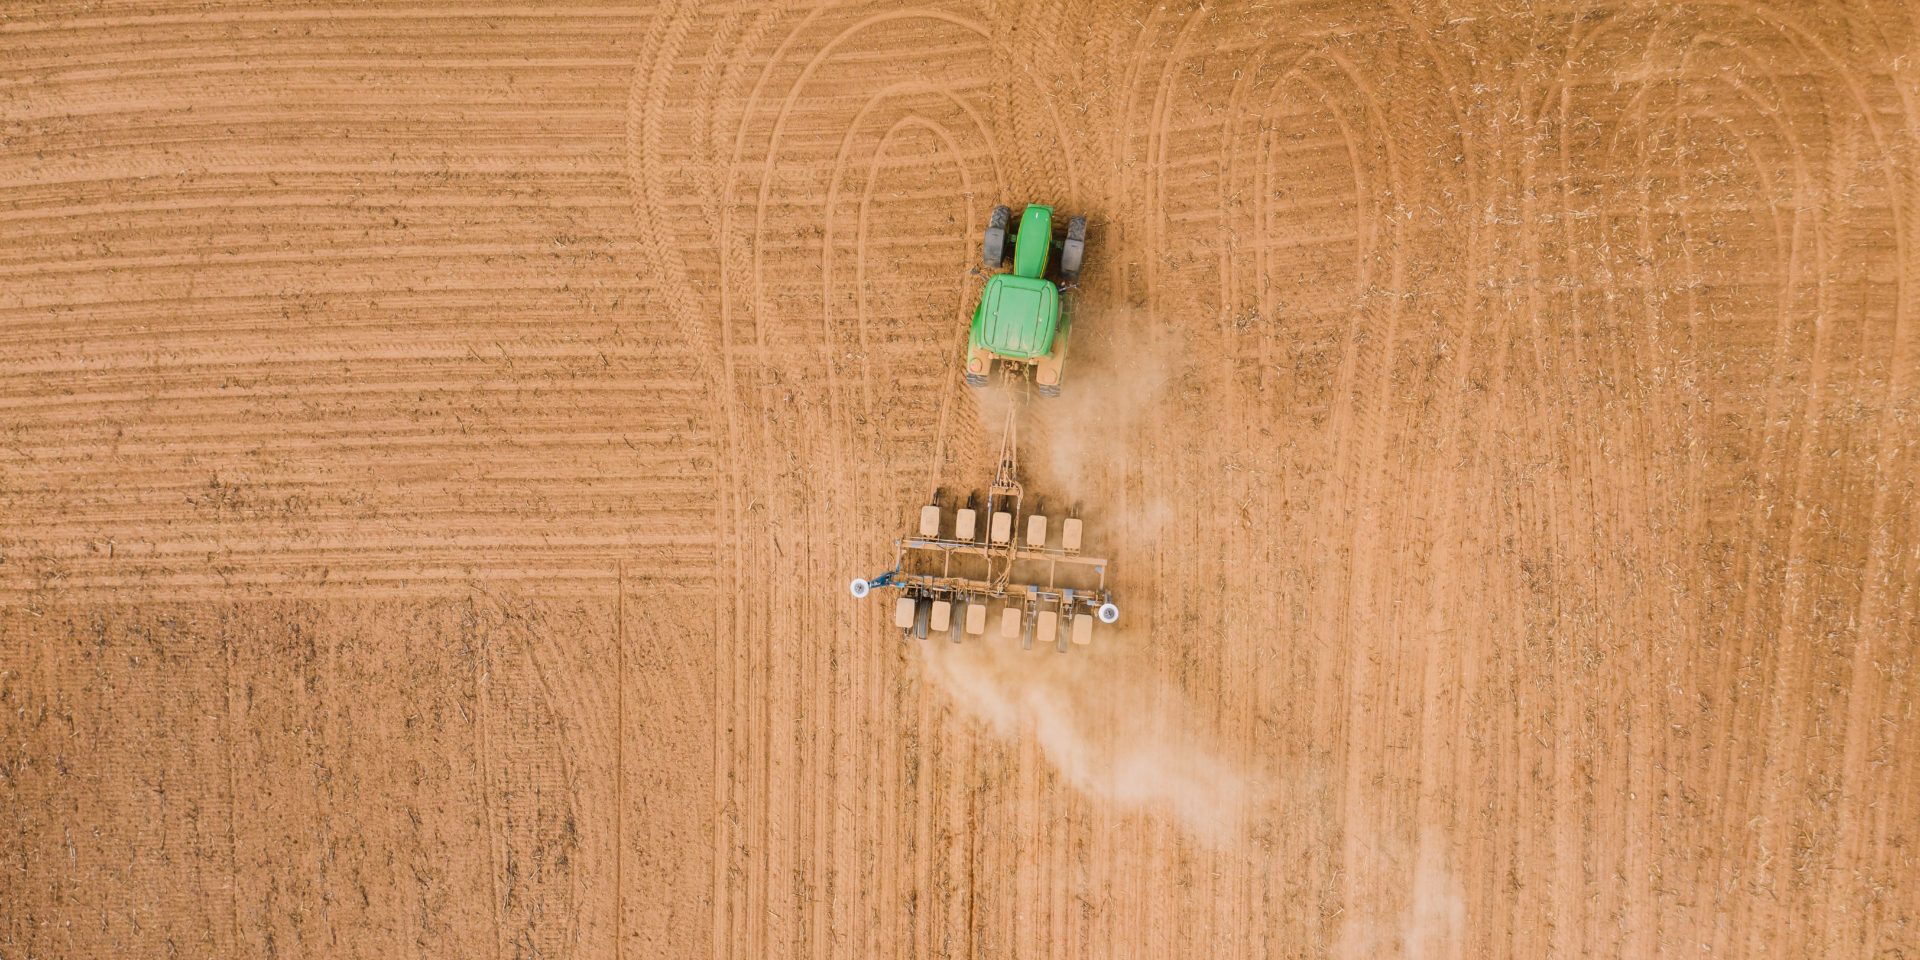 Image of tractor ploughing a field